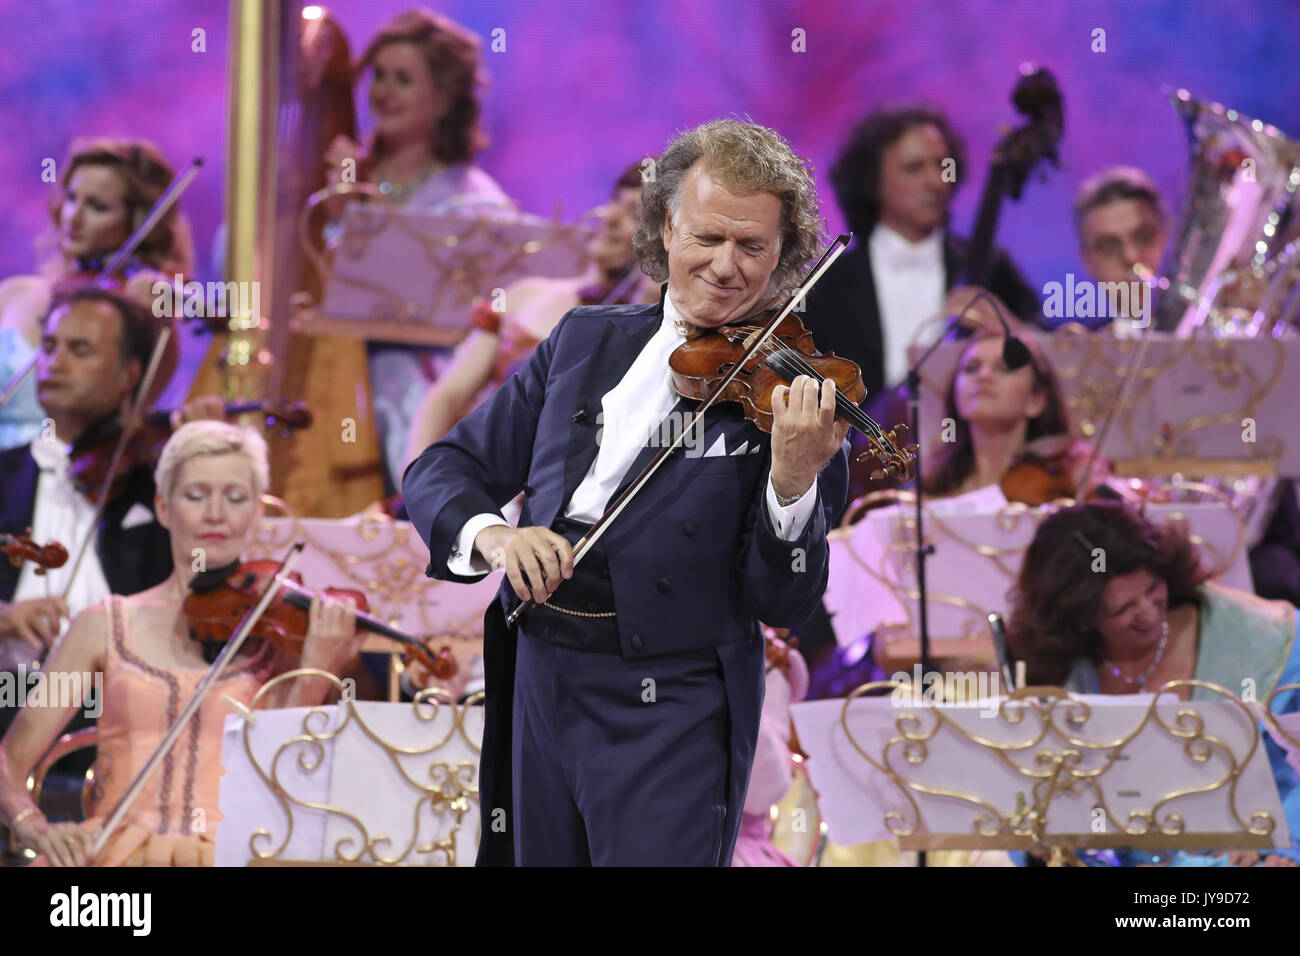 David Hasselhoff Joins Andre Rieu On Stage Live From Vrifthof Square In Maastricht As Part Of